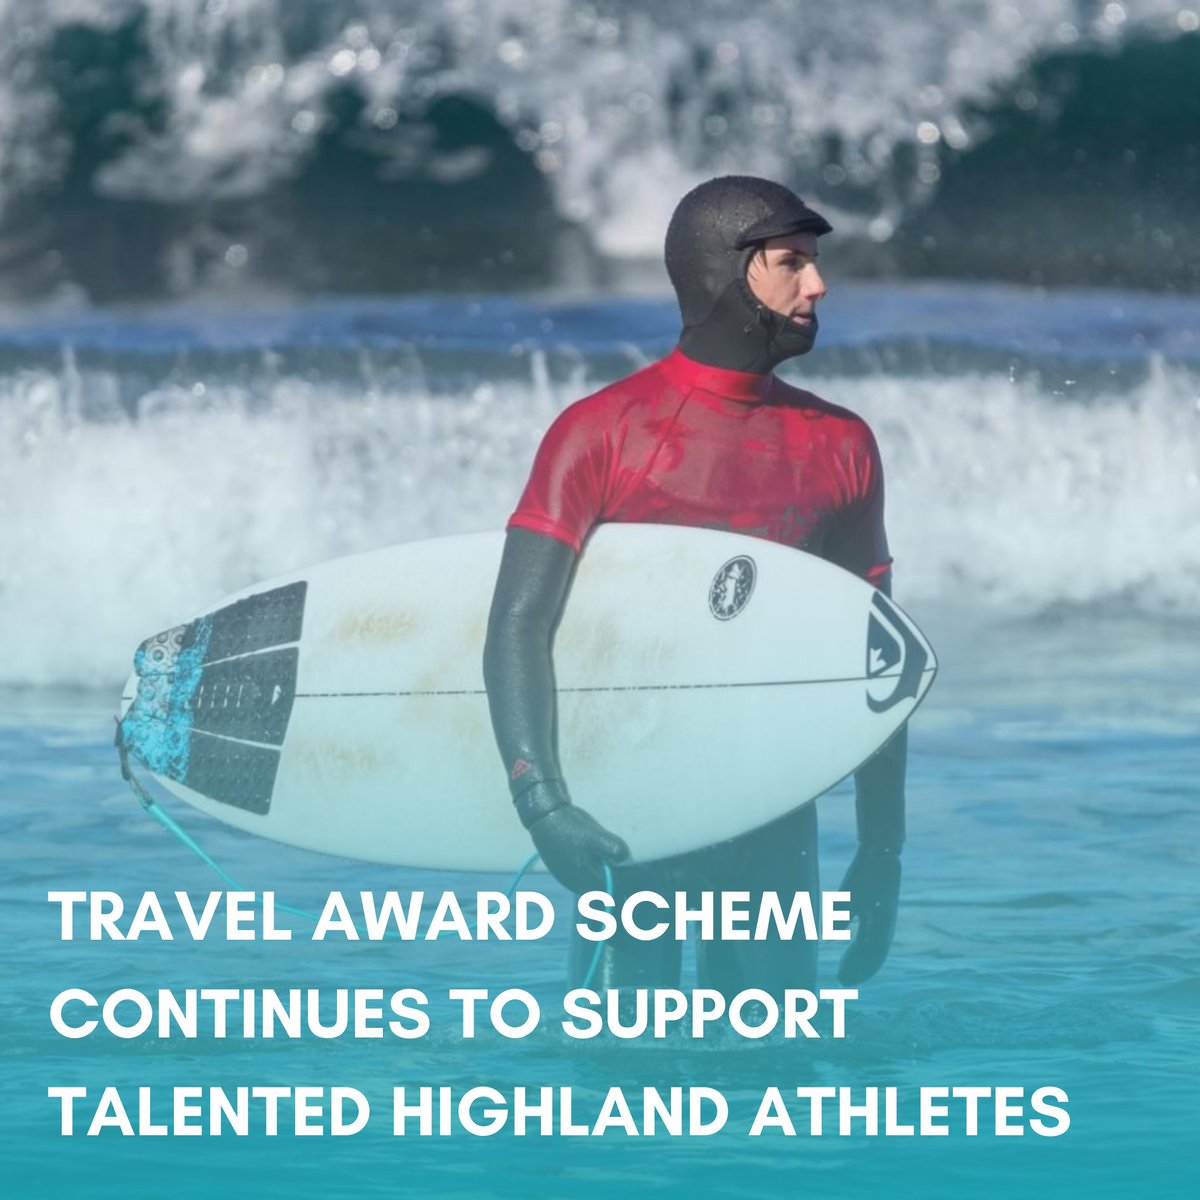 Talented athletes from across the Highlands are being supported through the Highland Athlete Travel Award Scheme 🏄🏌️‍♀️ 👉Find out who the ten athletes are: hlh.scot/ATAS @sportscotland